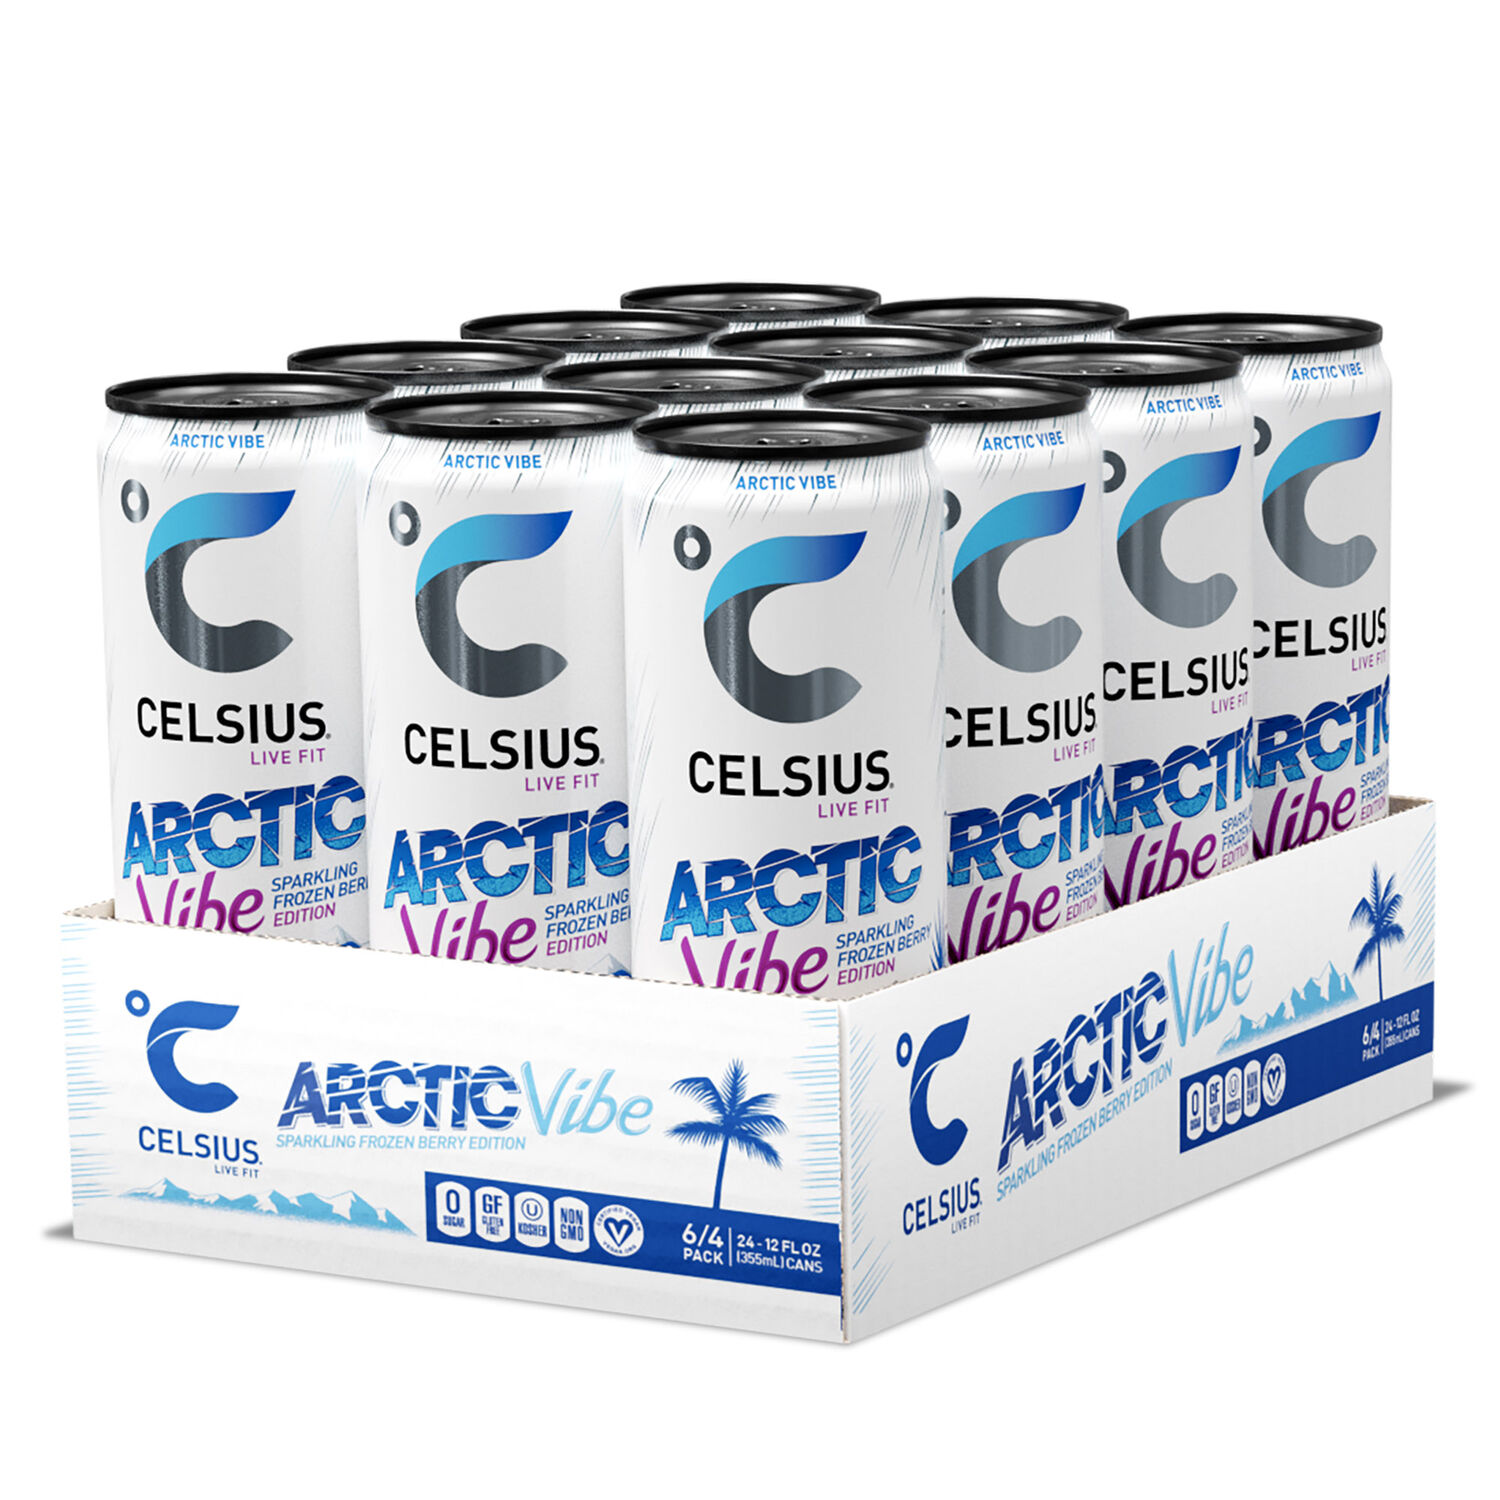 Celsius Sparkling Energy Drink Healthy - Arctic Vibe Healthy - 12Oz. (12 Cans)